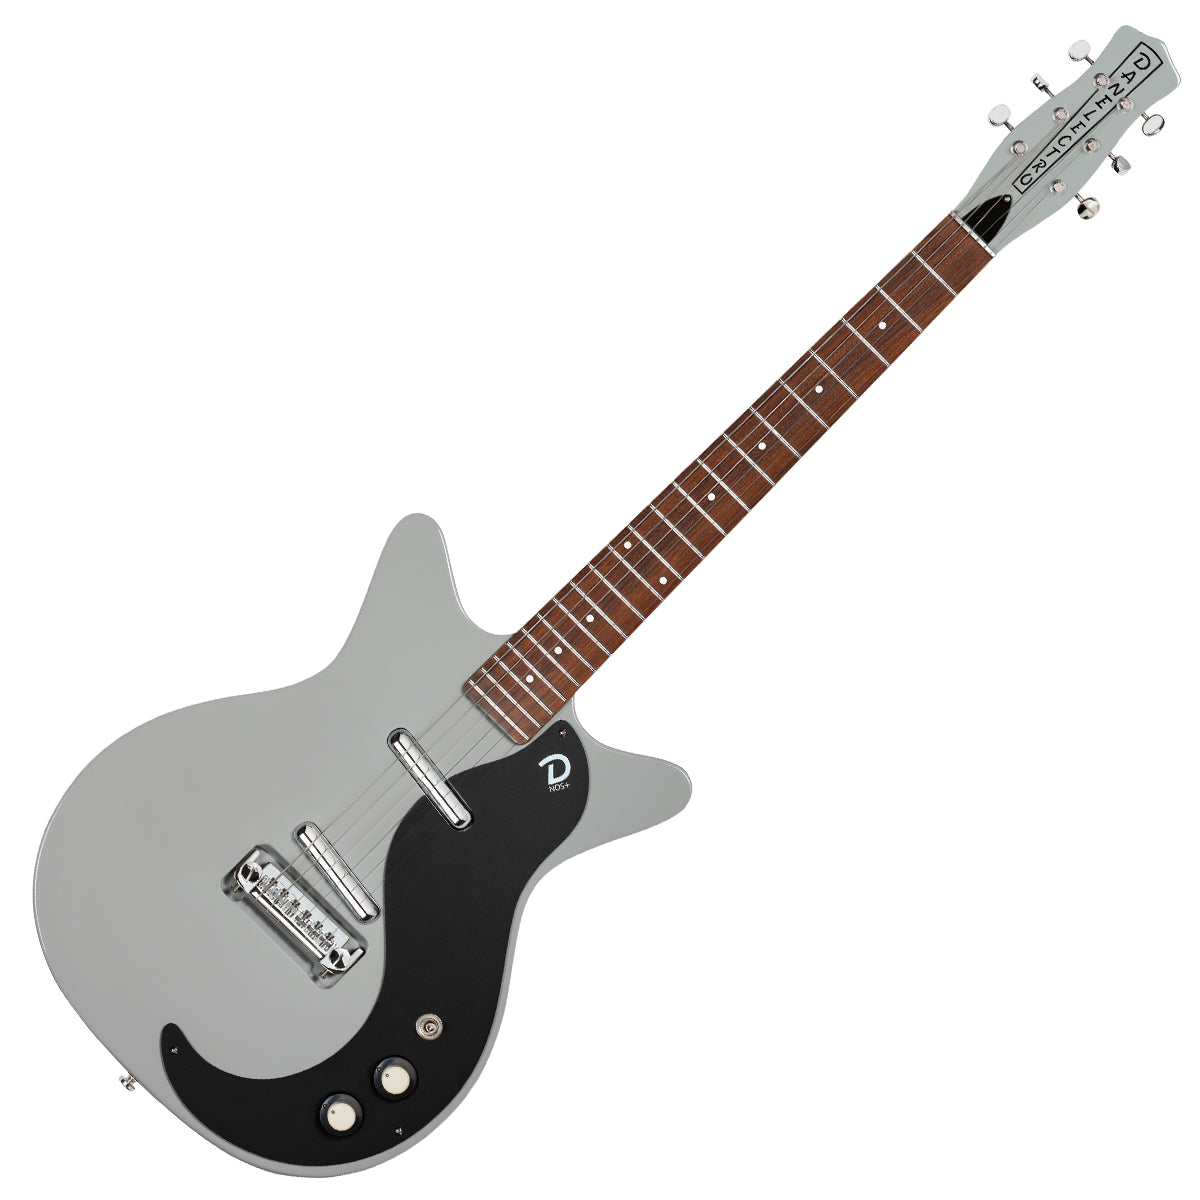 An image of Danelectro Dc59 Nos Guitar - Ice Gray | PMT Online